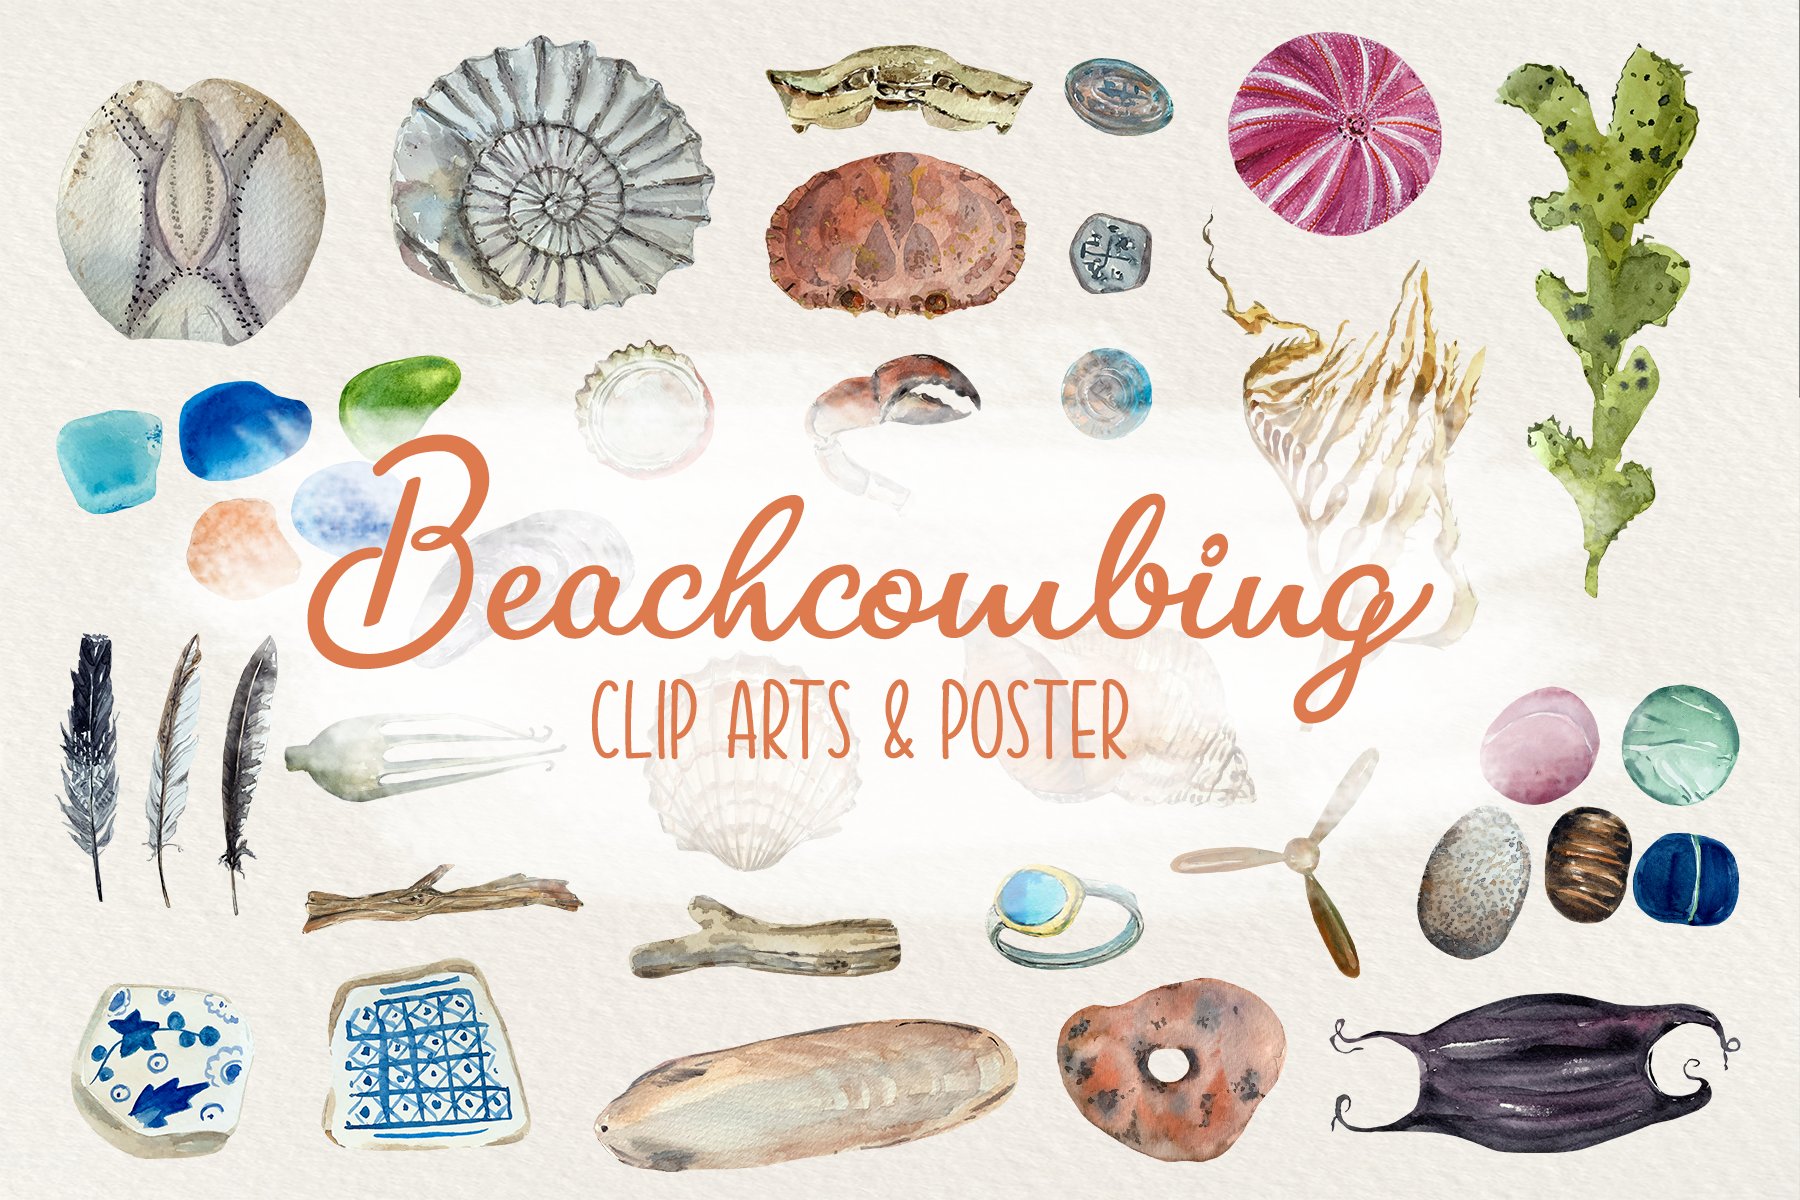 Beachcombing Clip Arts and Poster cover image.